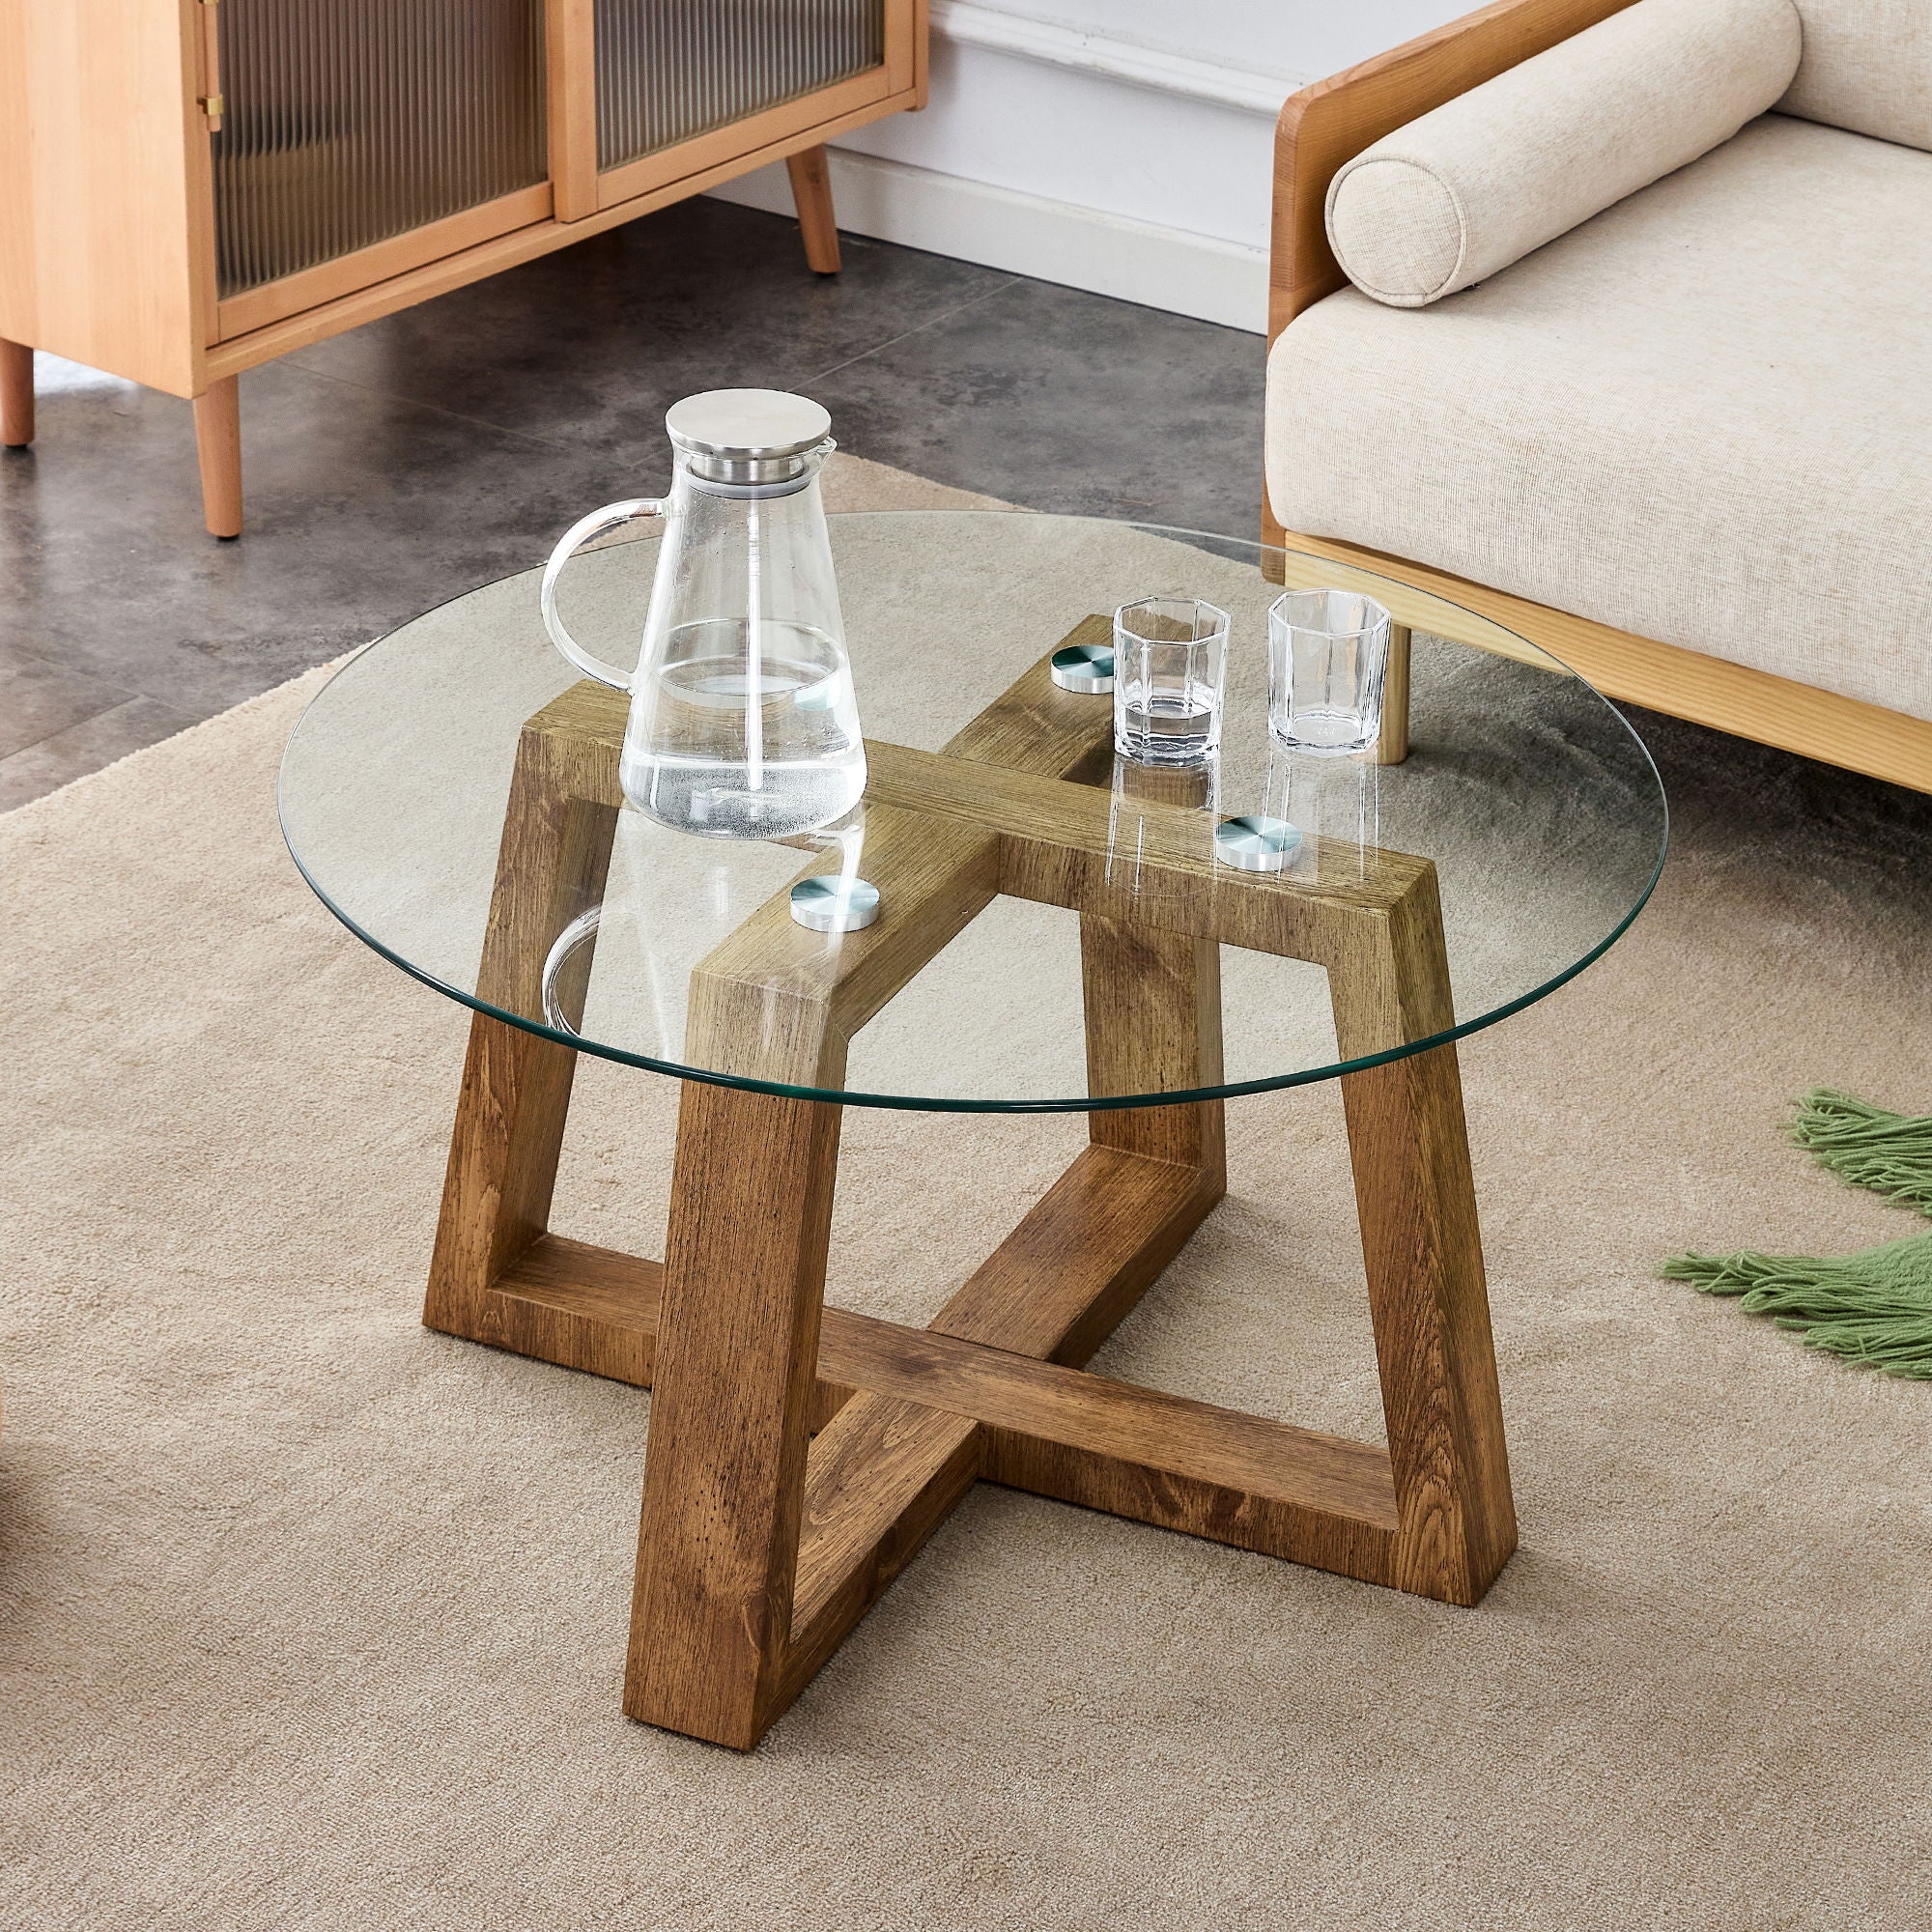 Modern Practical Circular Coffee And Tea Tables, Made Of Transparent Tempered Glass Tabletop And Wood Colored MDF Material, Suitable For Living Rooms And Bedrooms